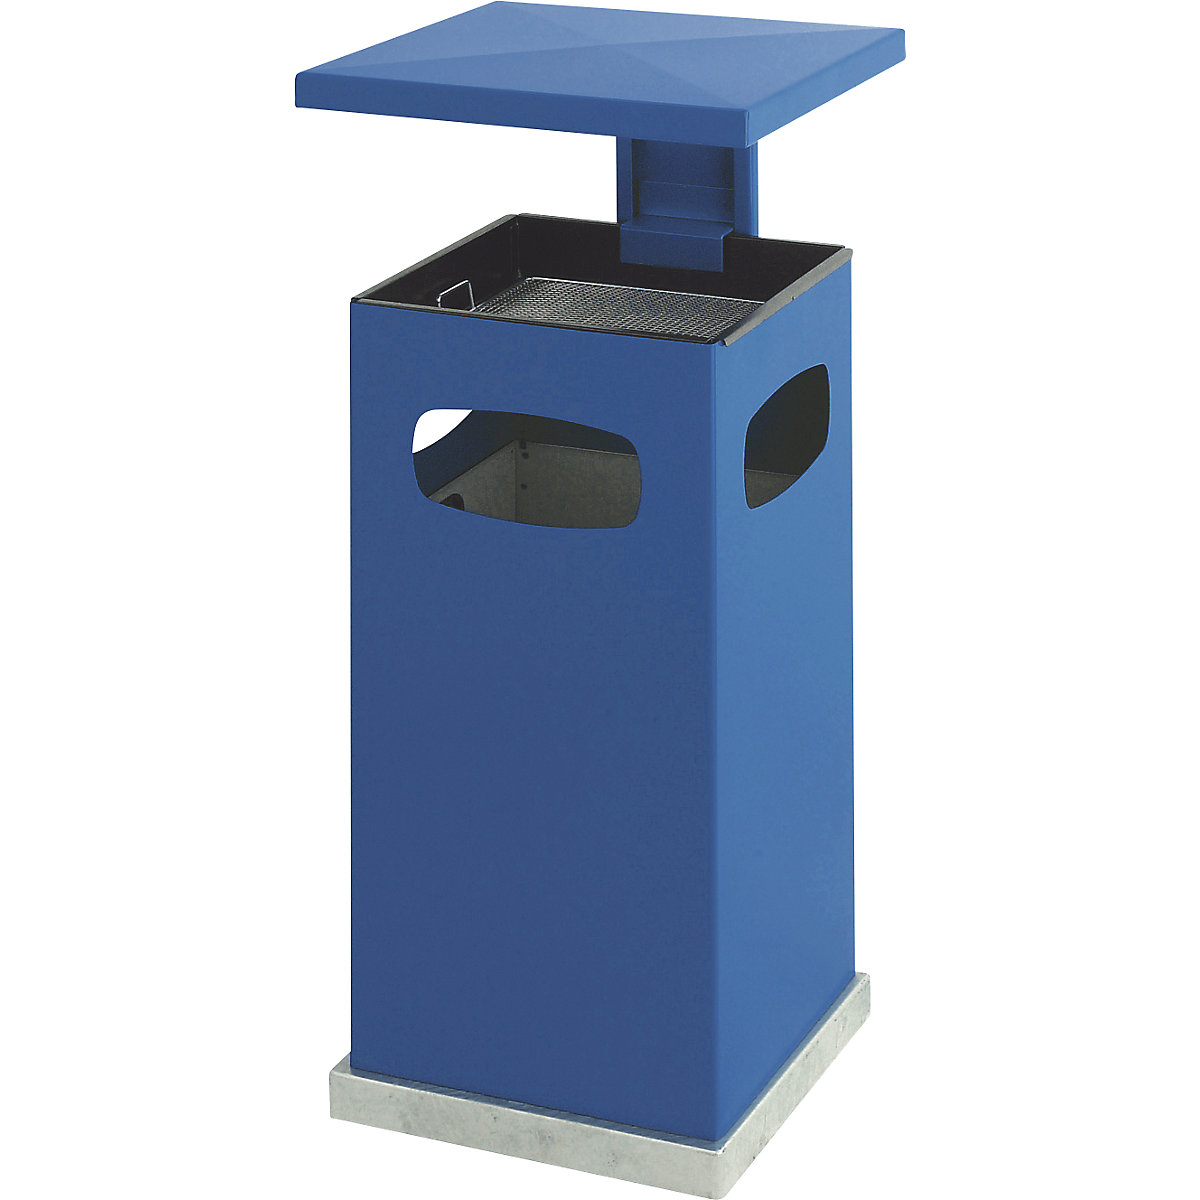 Waste collector with ashtray insert and protective cover, capacity 38 l, WxHxD 395 x 910 x 395 mm, gentian blue